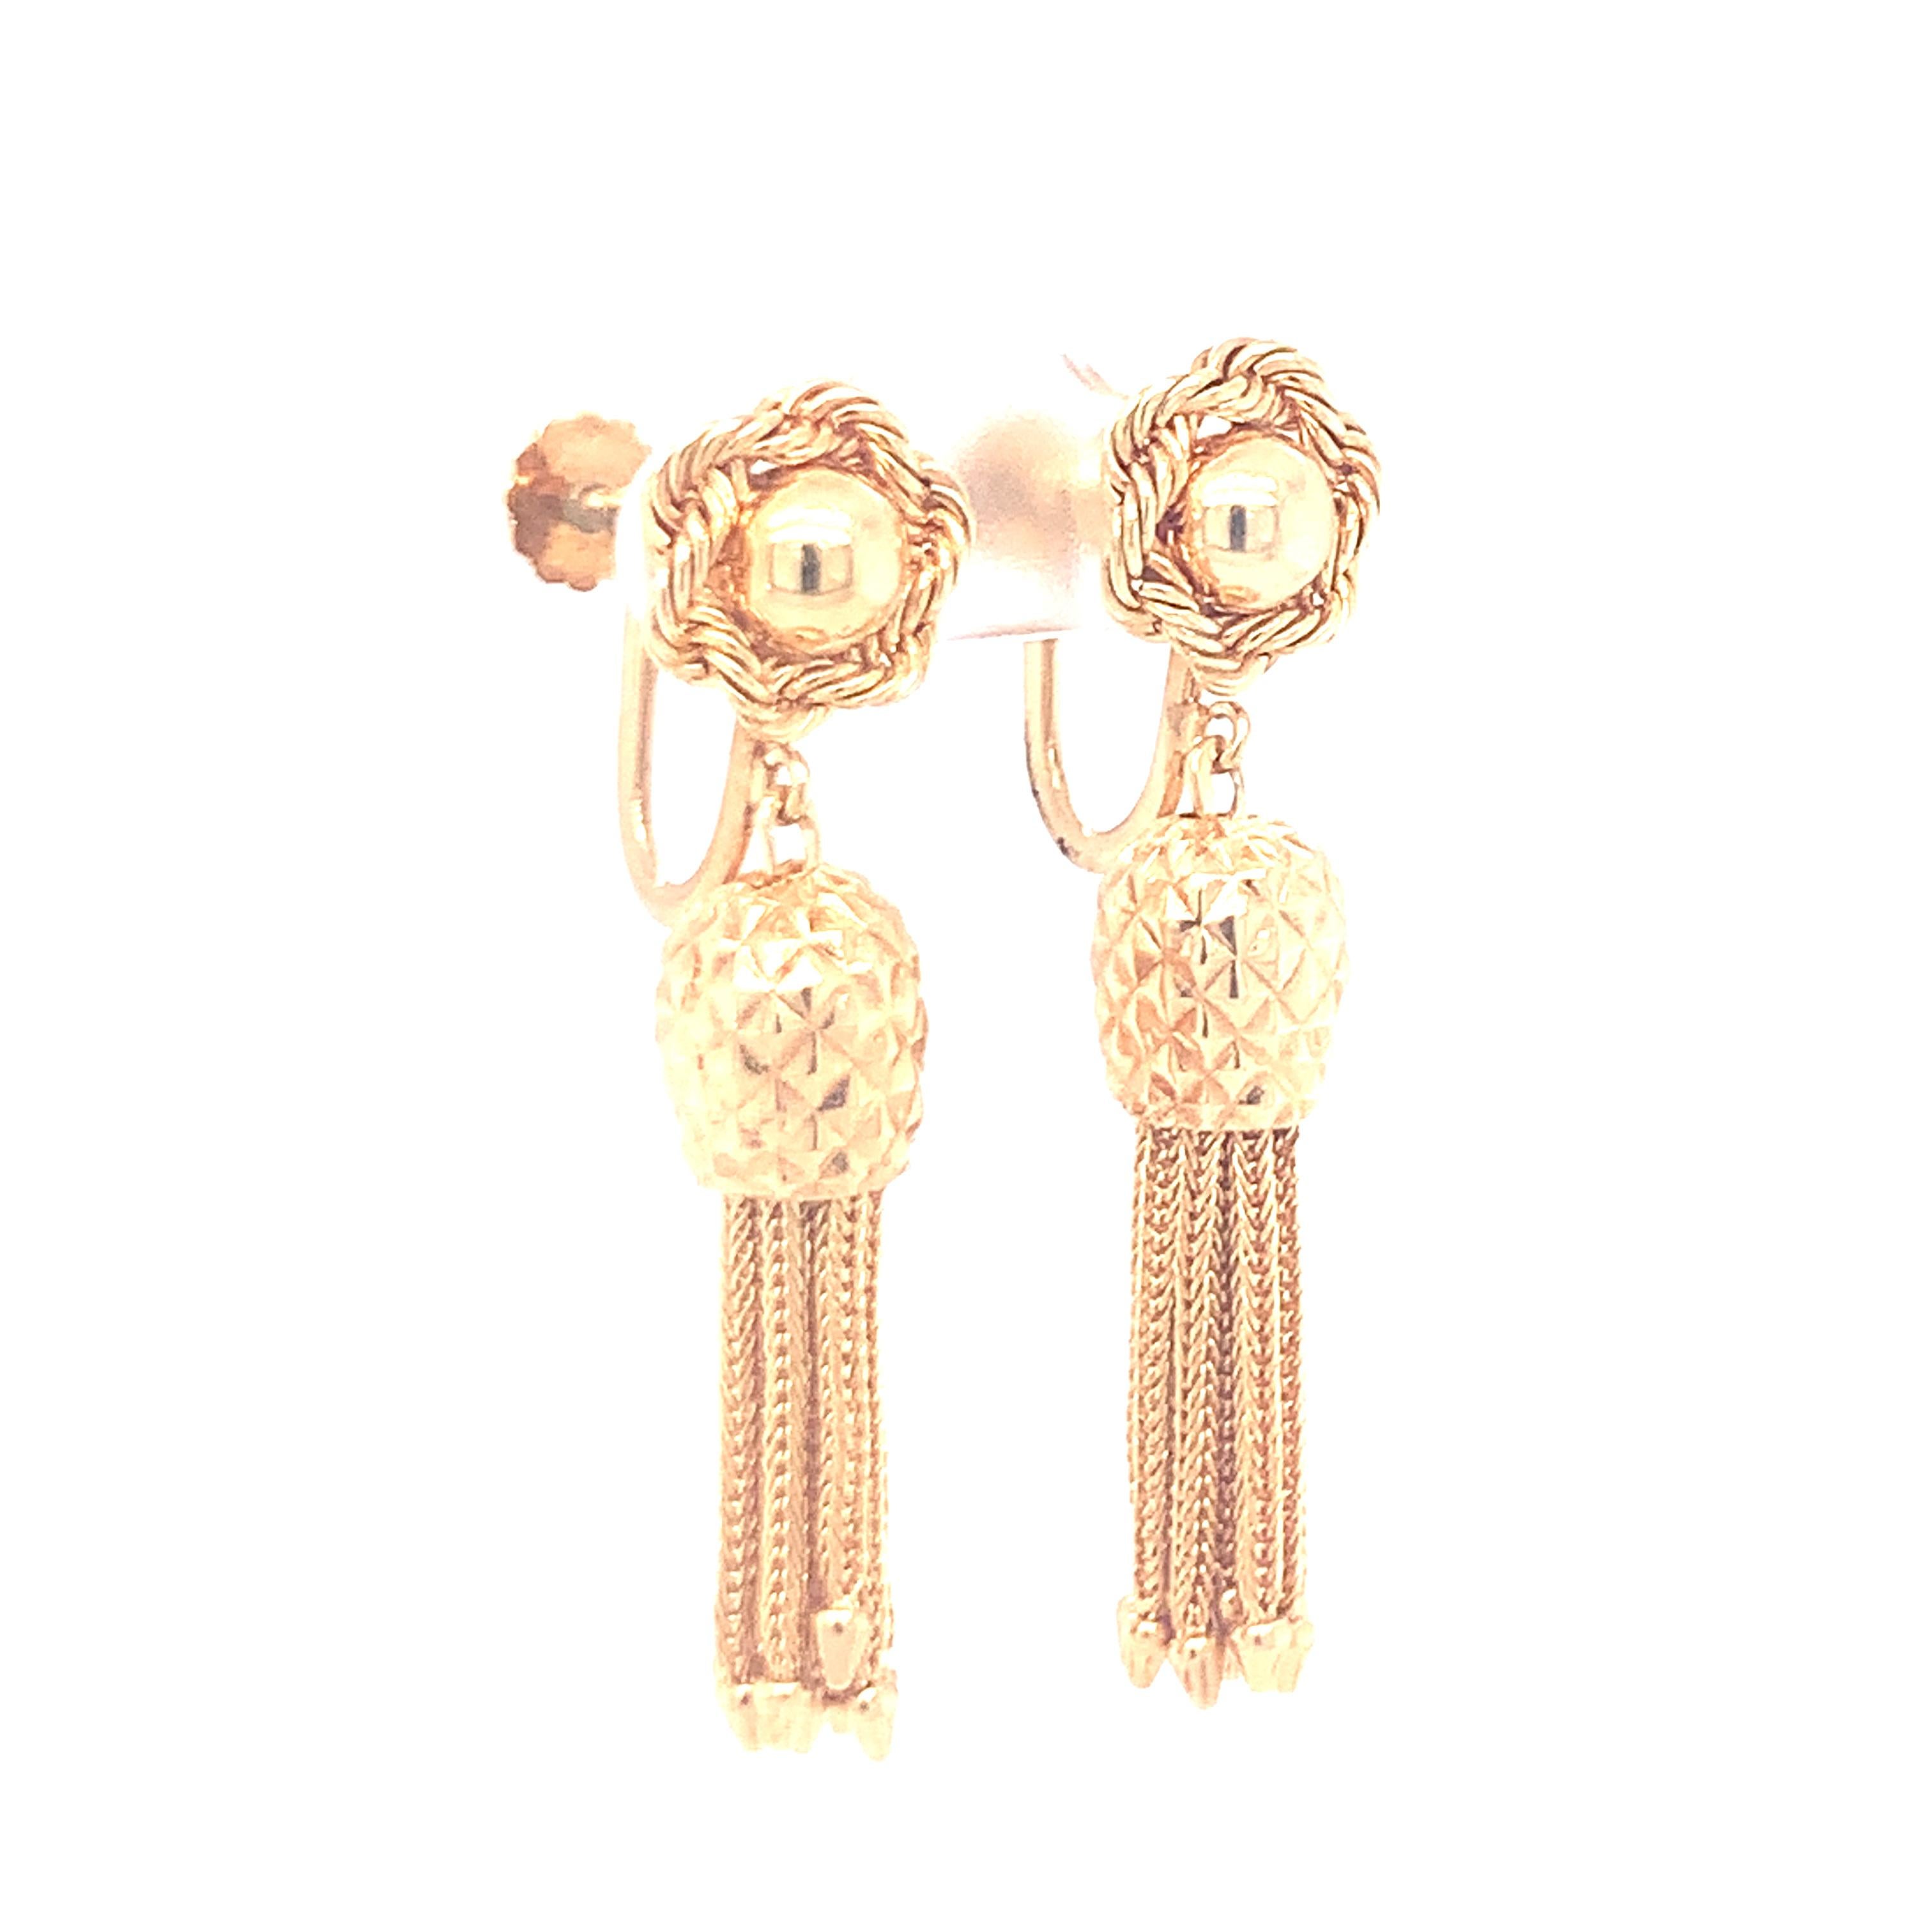 One pair of 14K yellow gold dangling earrings with rope twist design and dangling tassles measuring 2 inches long. Circa 1960s.

Adorable, playful, eye-catching.

Metal: 14K yellow gold
Circa: 1960s
Size/Measurements: 2 inches long
Weight: 16 grams
